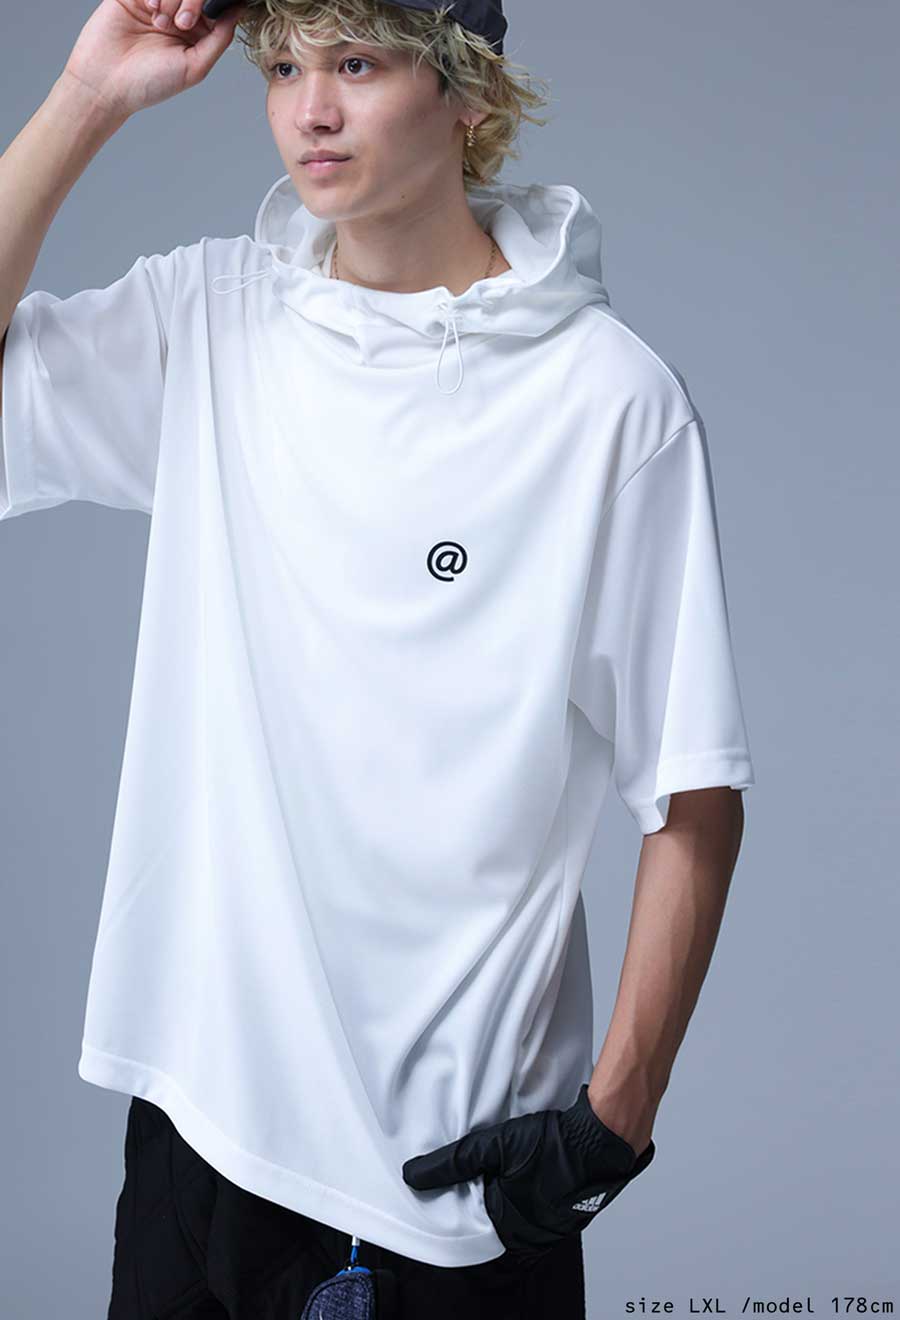  great popularity! re-arrival expectation equipped!ANTIQUA GOLF×STCH pull over men's free shipping * repeated ..100pt mail service possible [Z]